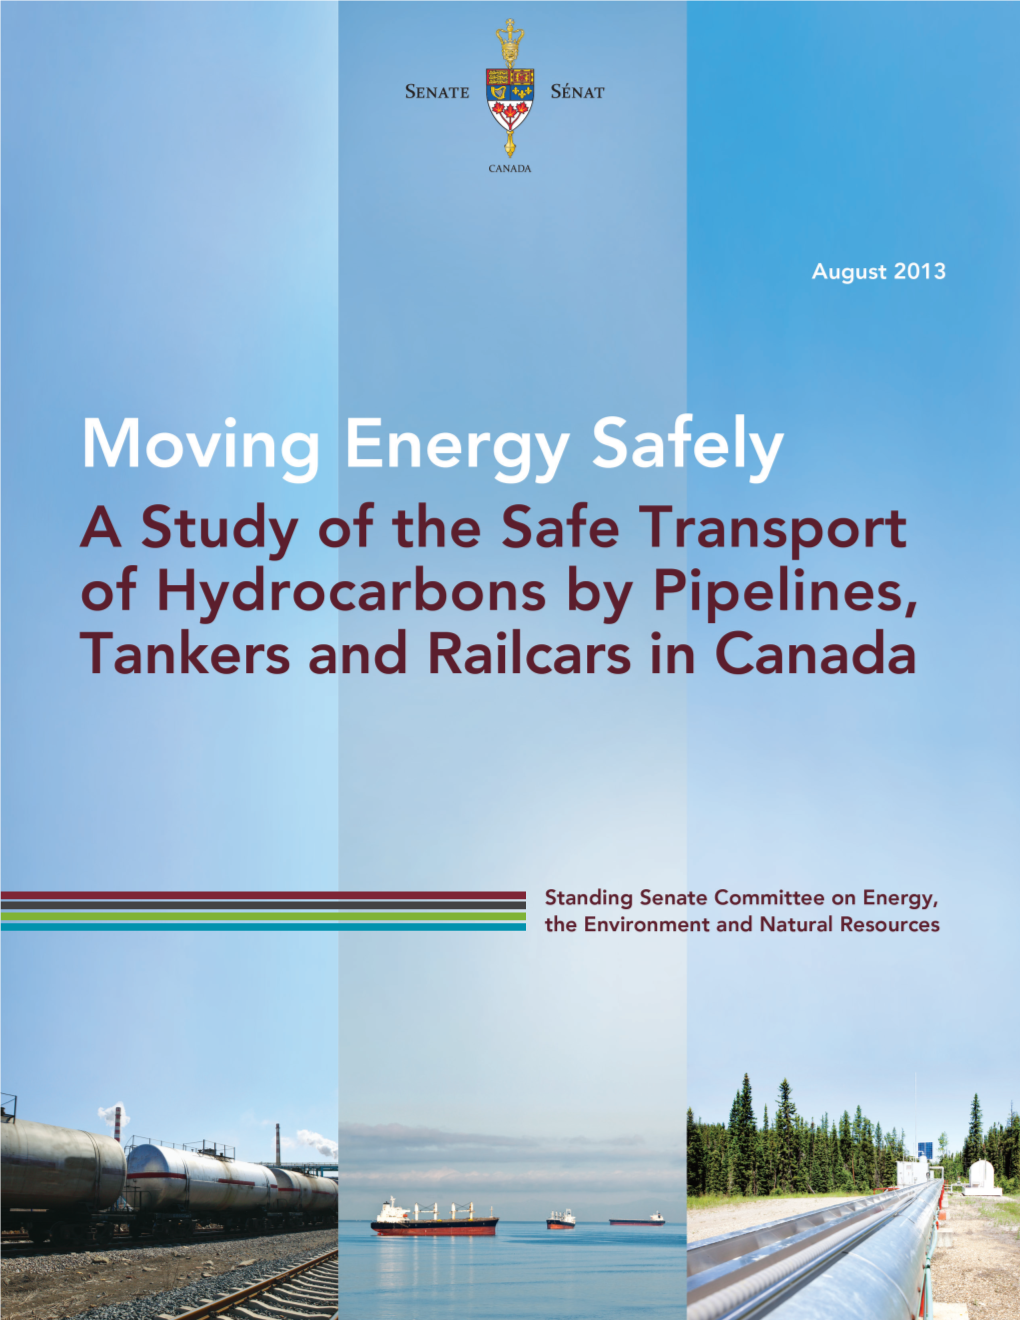 Transport of Hydrocarbons by Pipelines, Tankers and Railcars in Canada